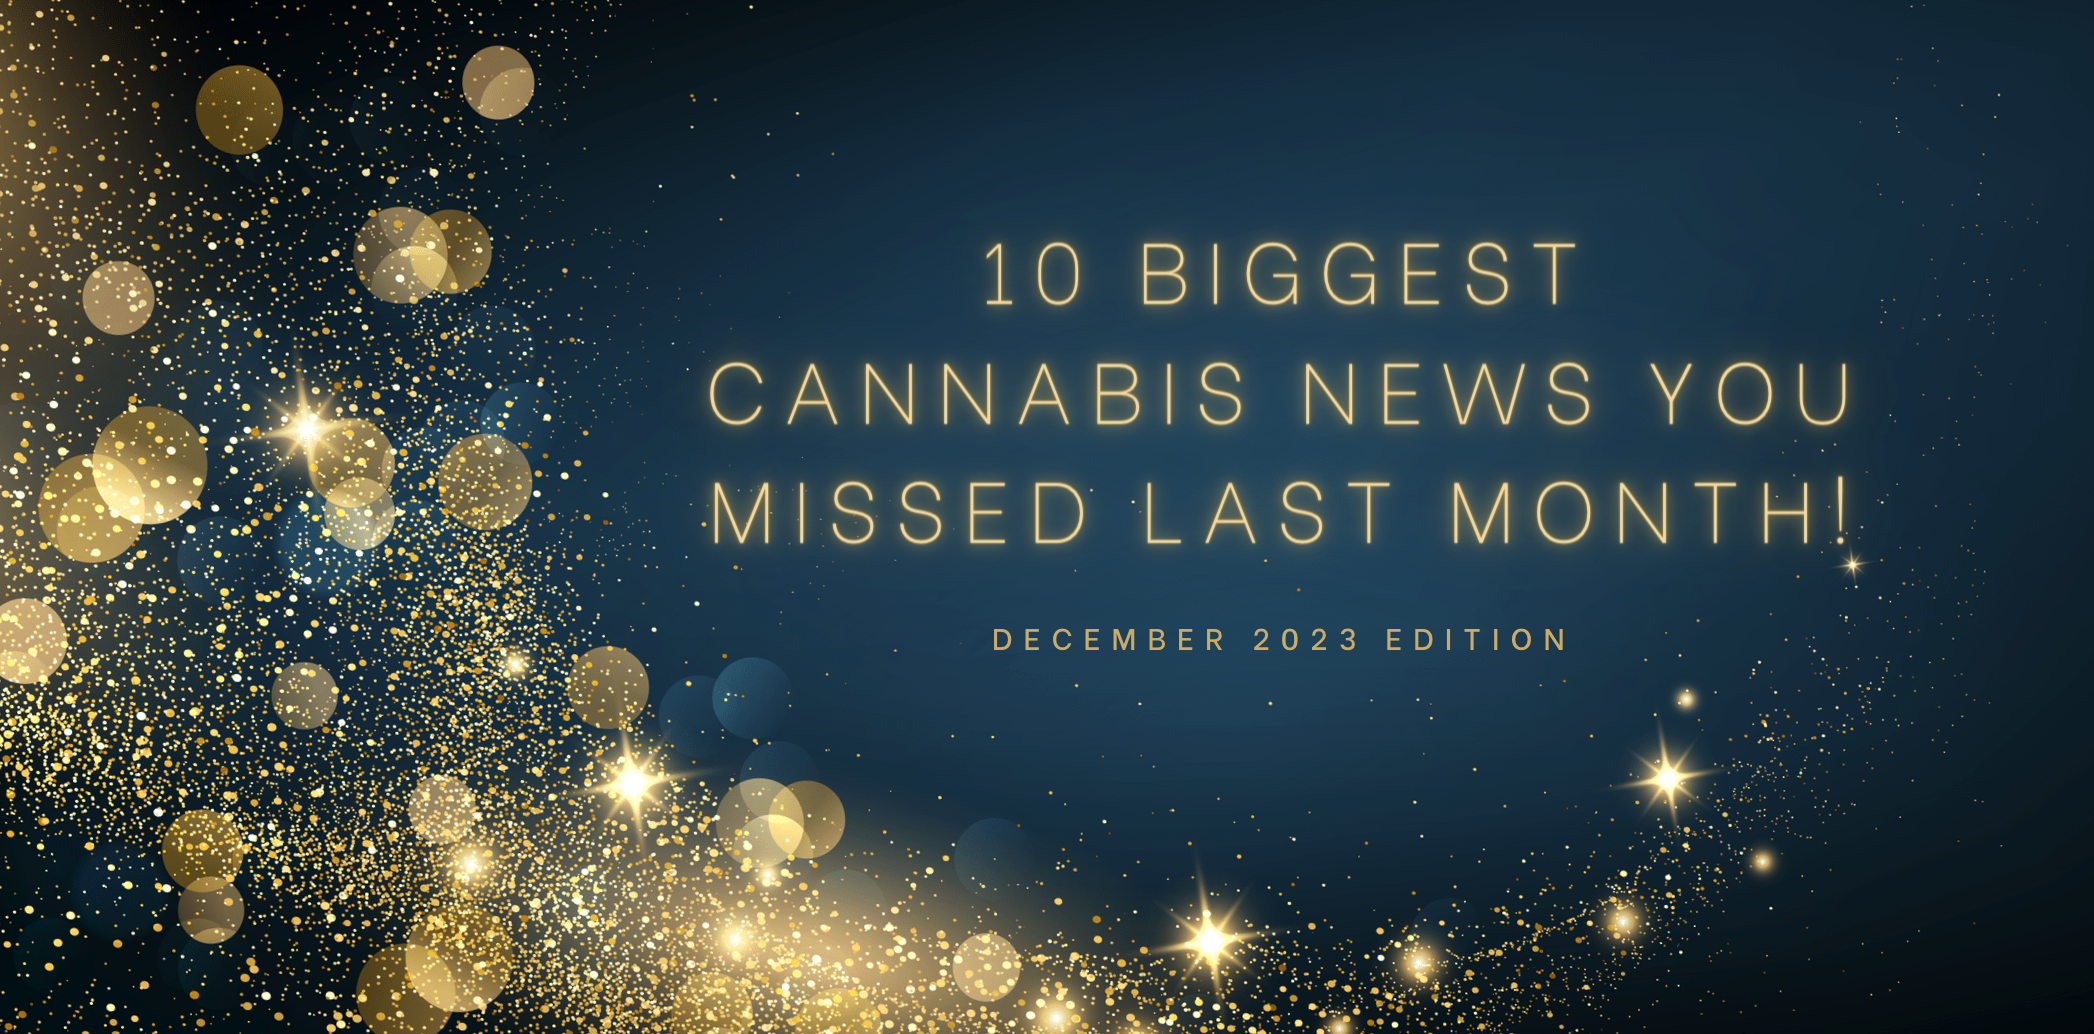 10 Biggest Cannabis News You Missed Last Month. December 2023.